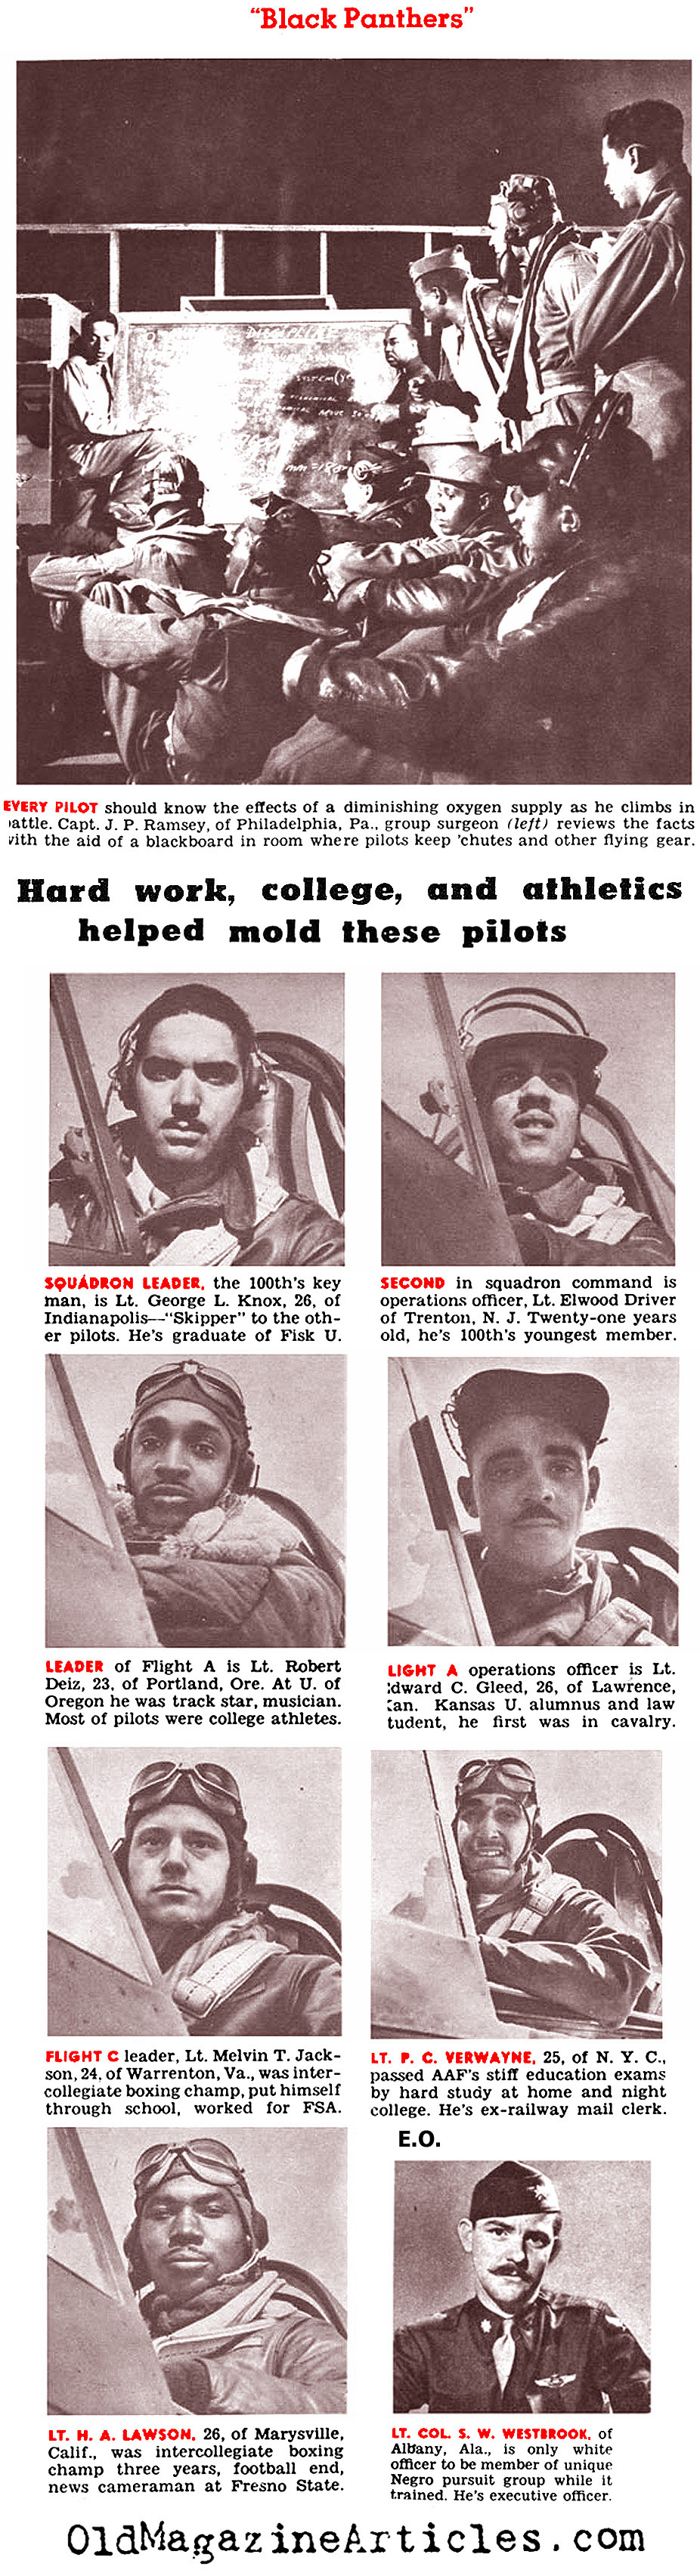 African-American Fighter Pilots (Click Magazine, 1943)